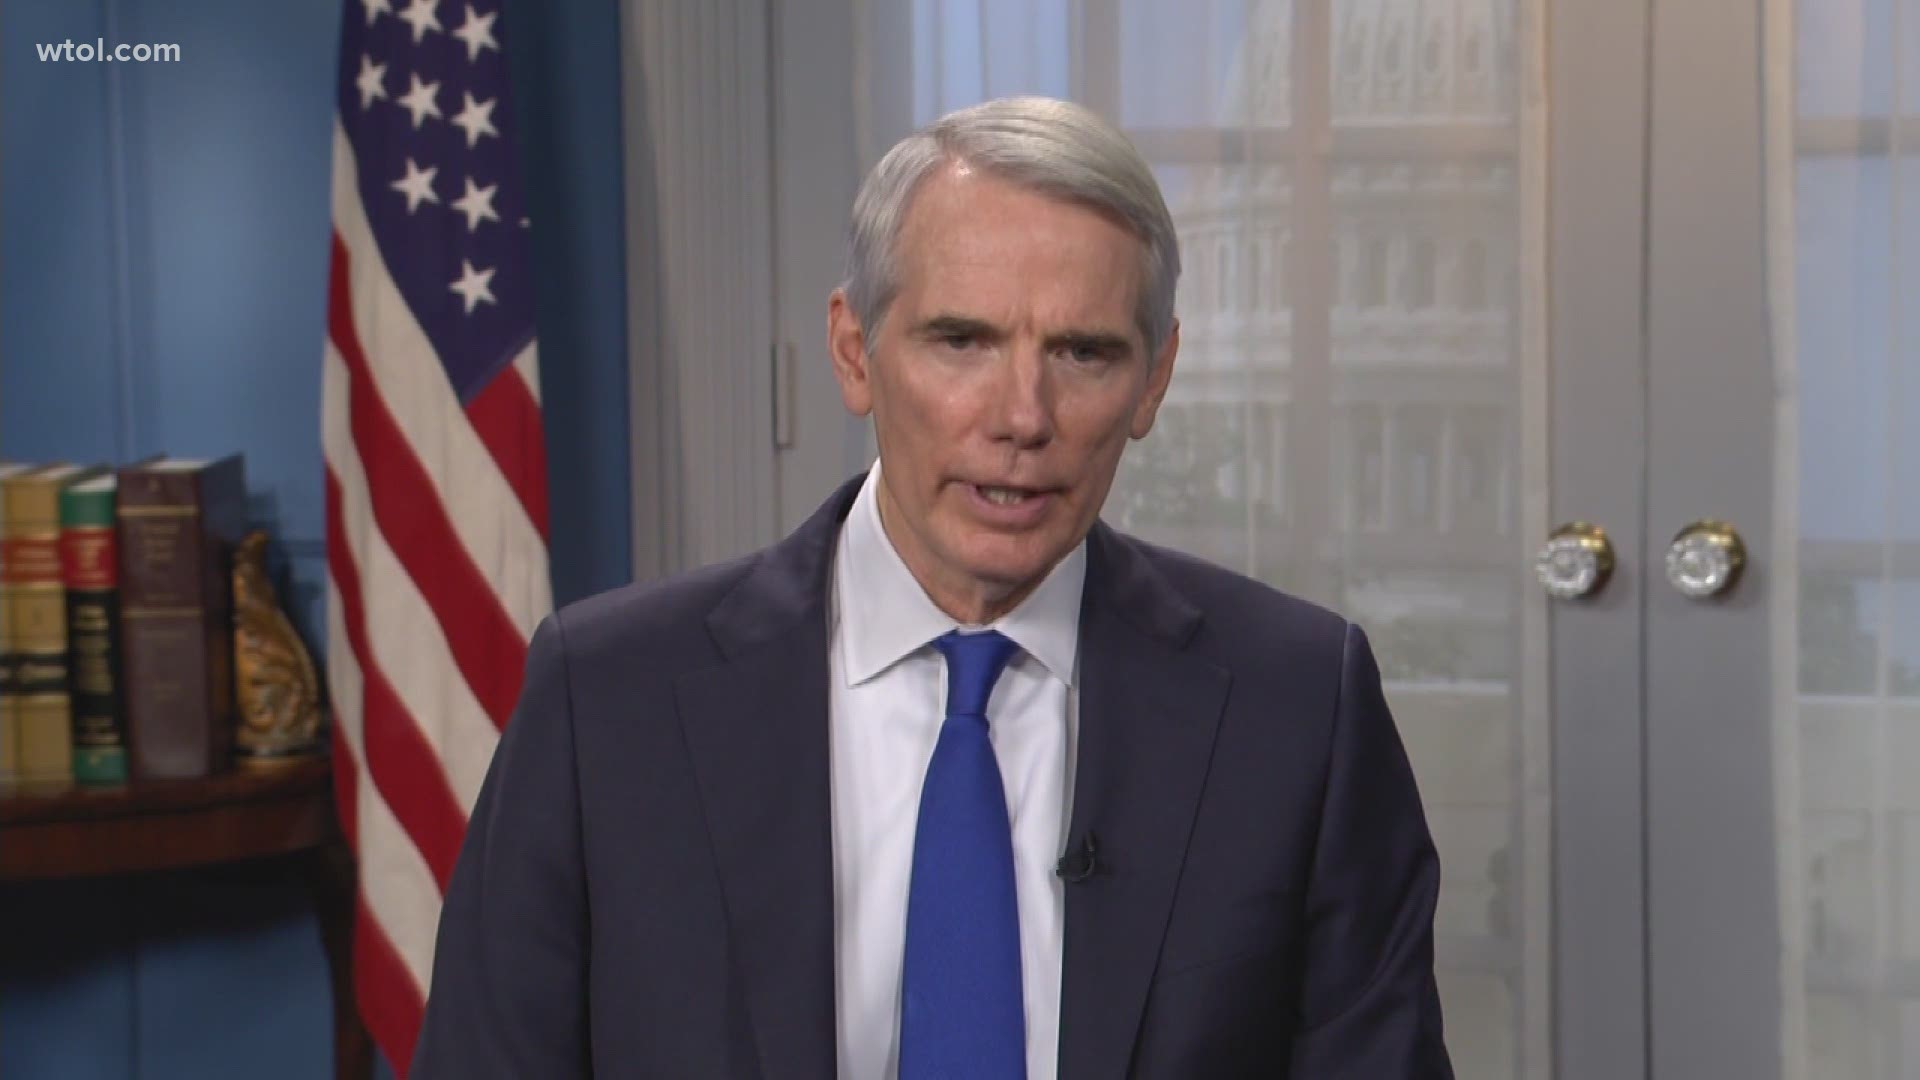 Sen. Rob Portman, R-Ohio, talks about the impeachment and announcement of not running for reelection with Jerry Anderson.